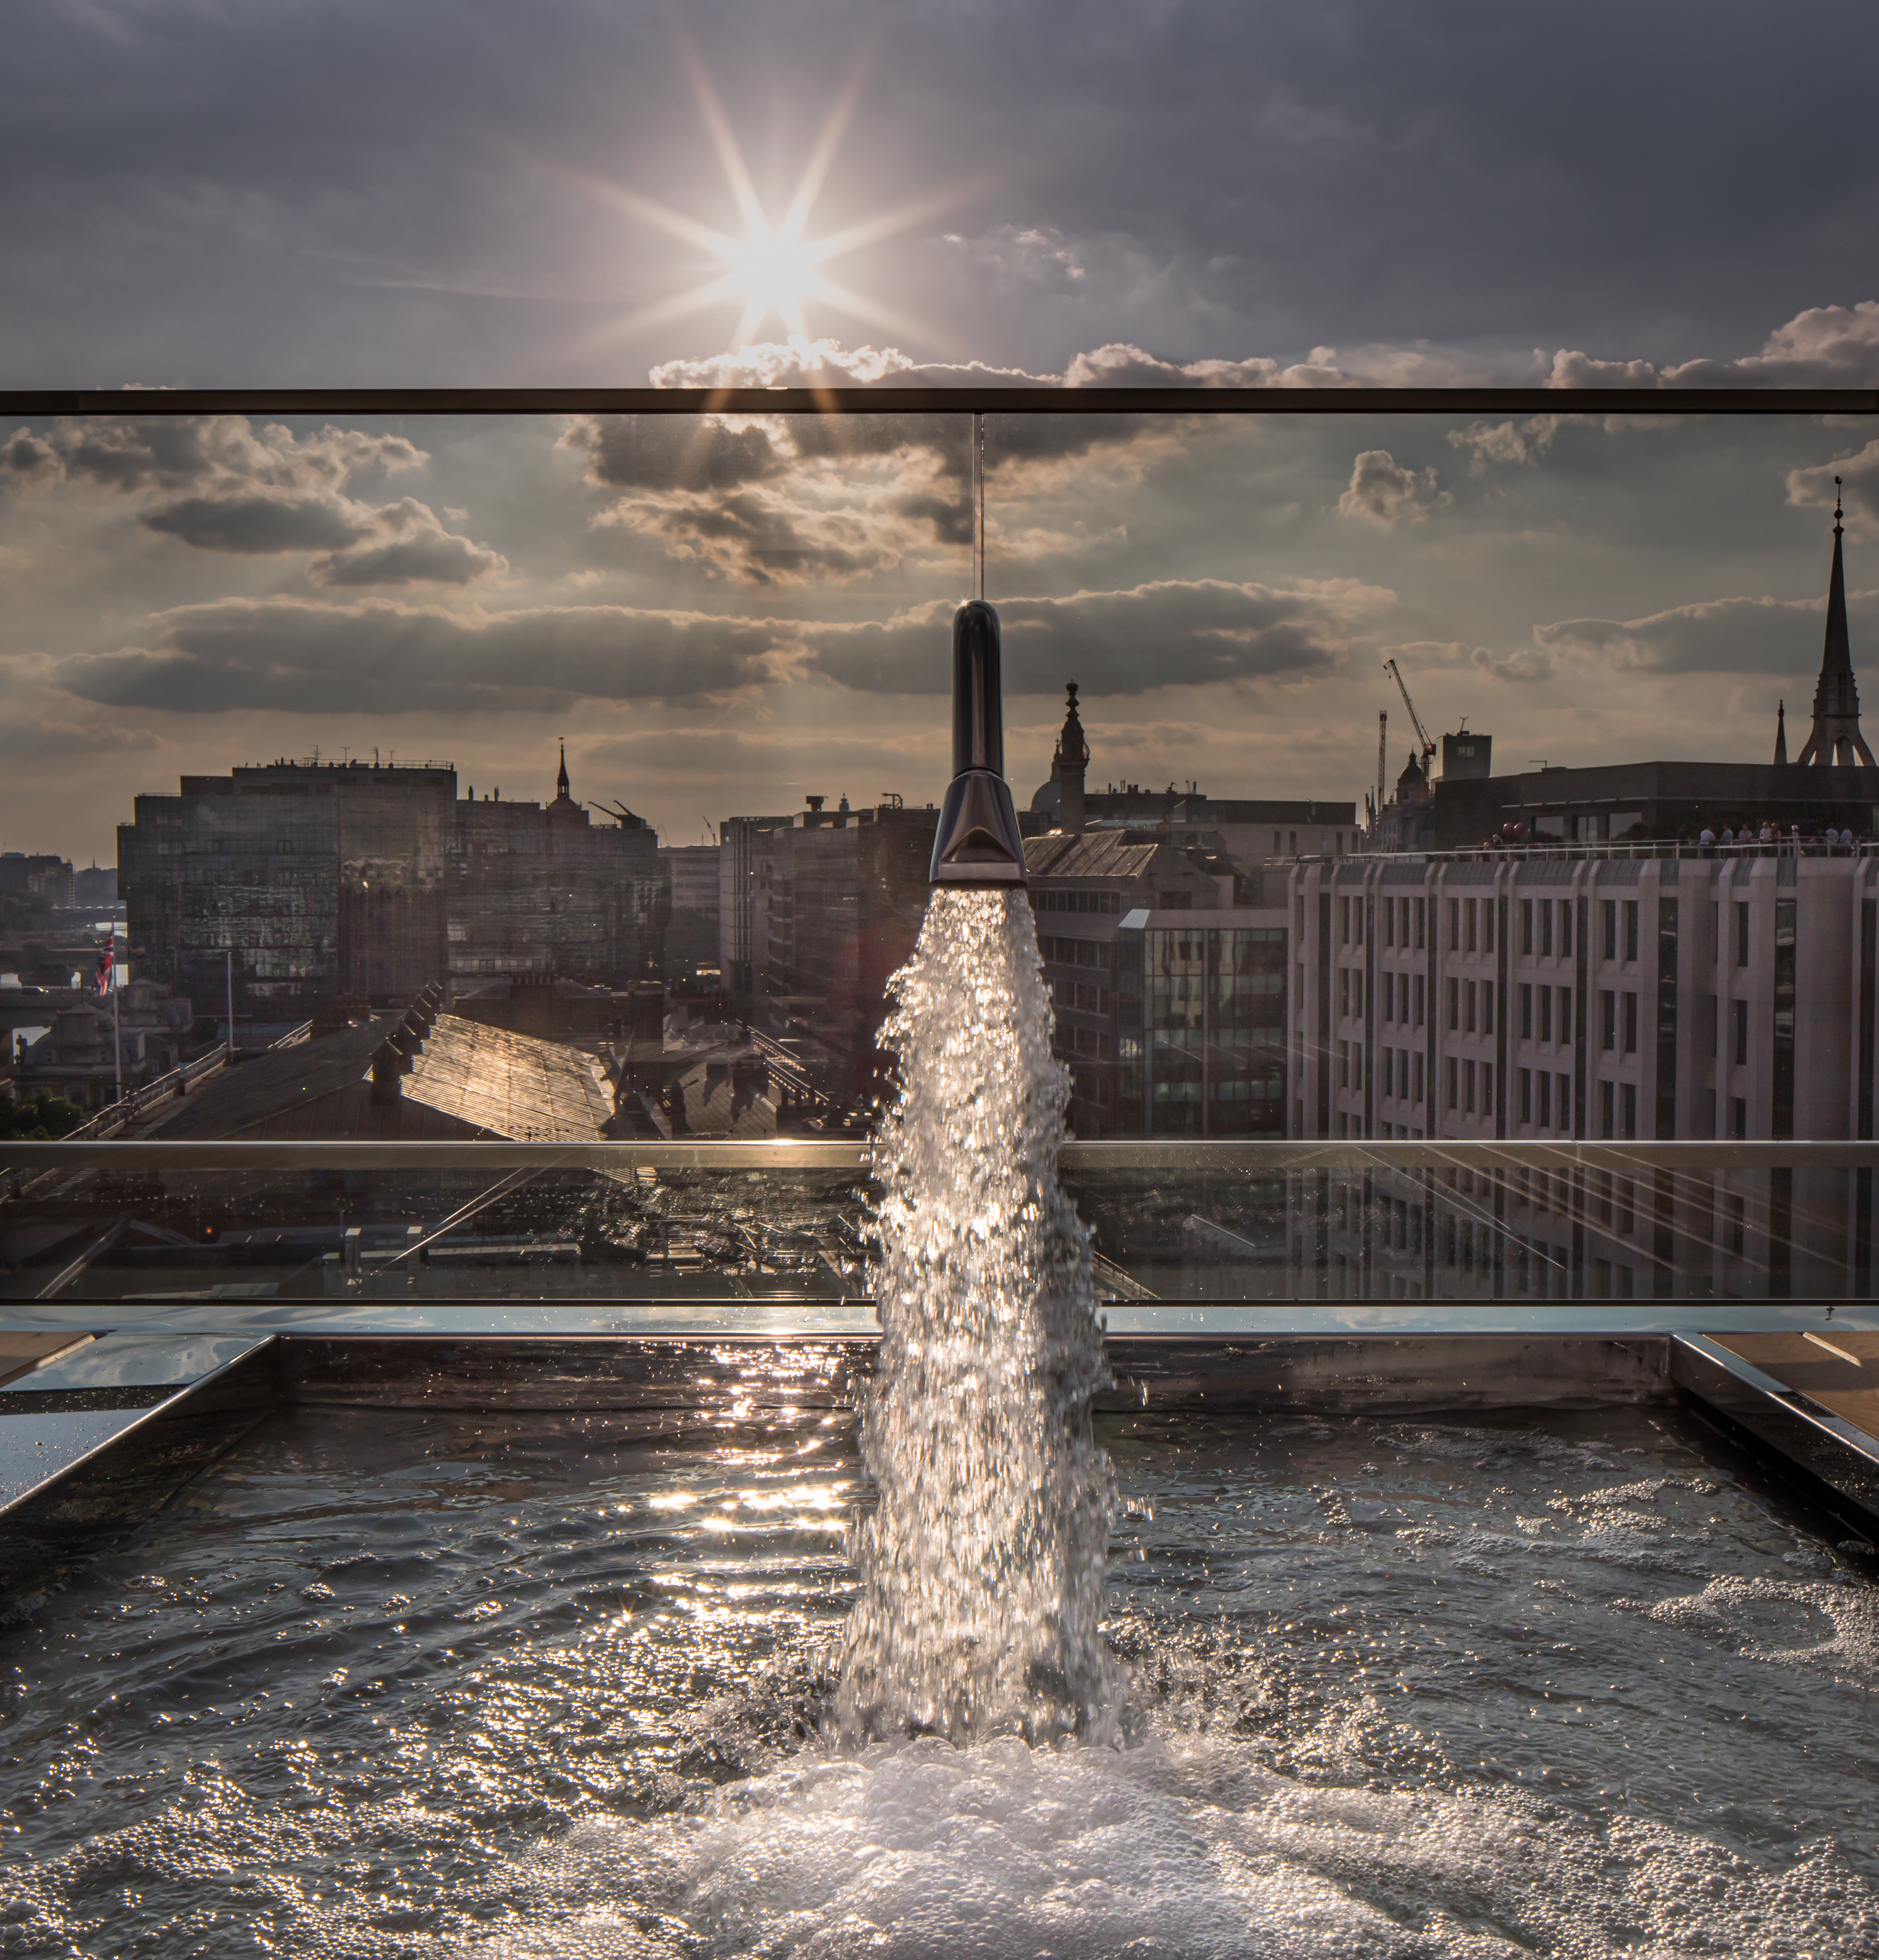 Large Spa Jet with water gushing out of the funnel.  The sunn is shining on the water as it enters the Spa sparkling from the sun setting in the distance.  The roof top spa has far reaching views of London Architecture and buildings that sit on the banks of the Thames, London - Architectural Photography by Di Jones Photography